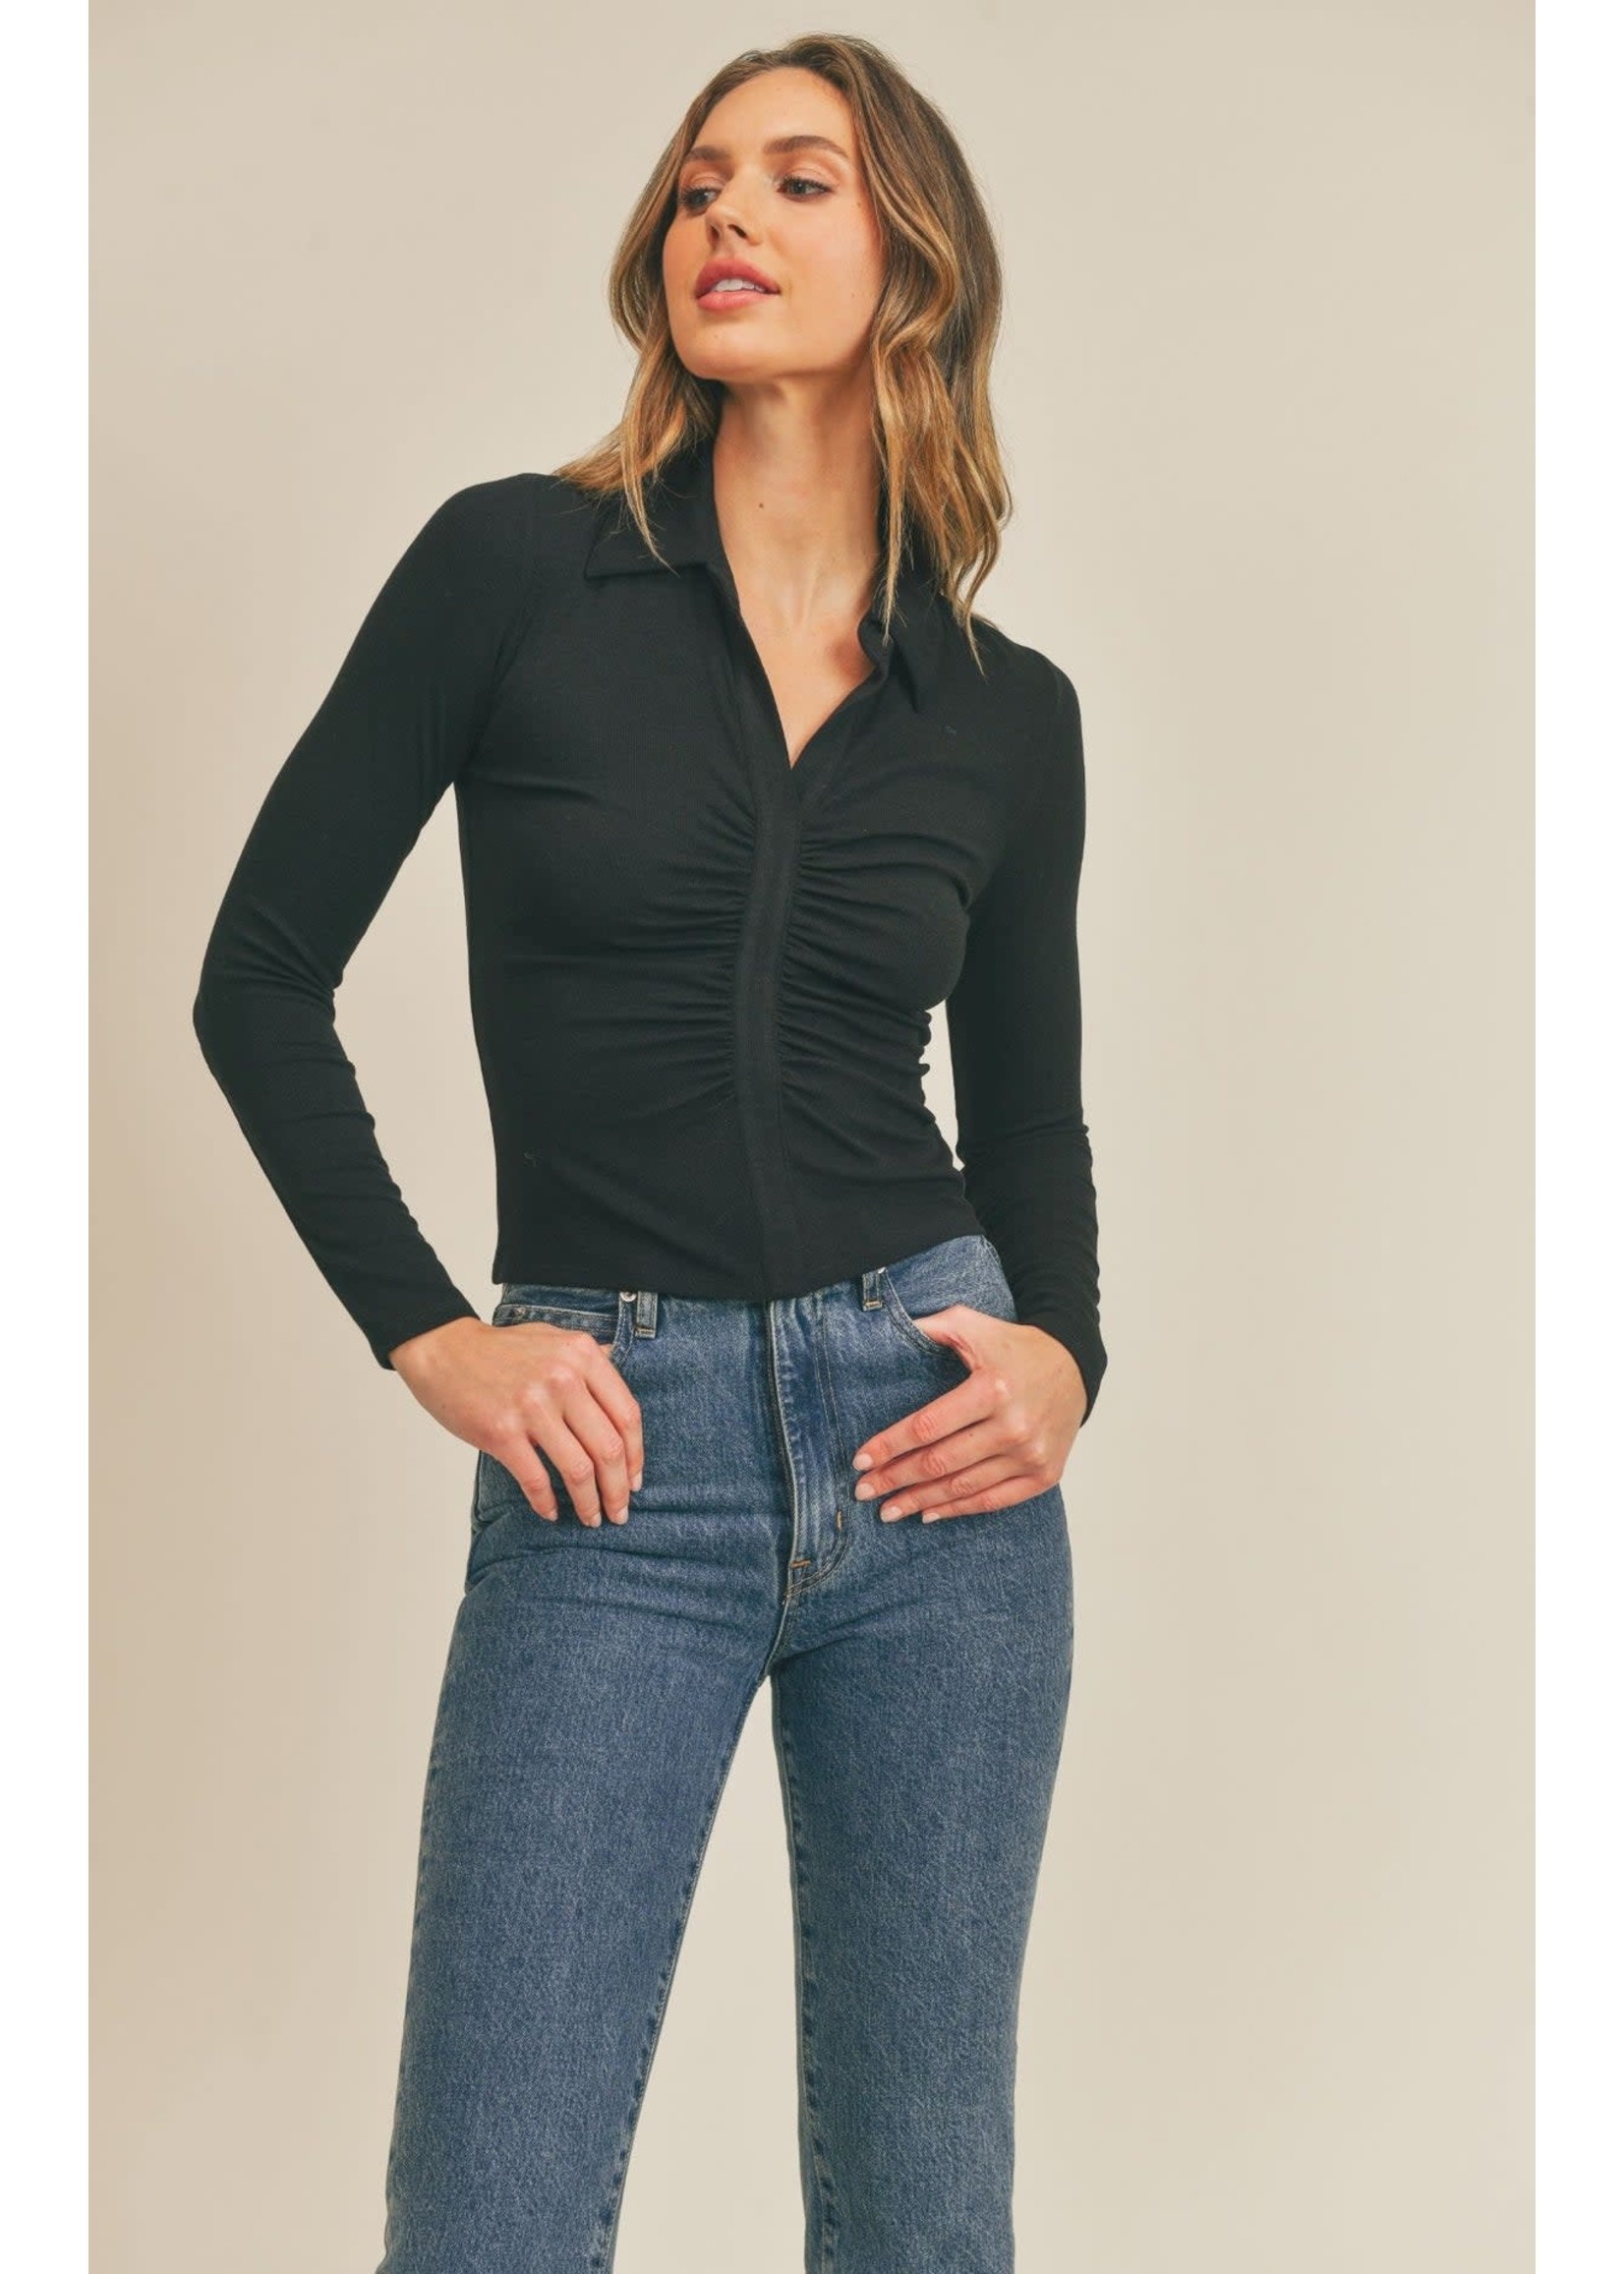 Sadie & Sage Play It Right Open Collar Top